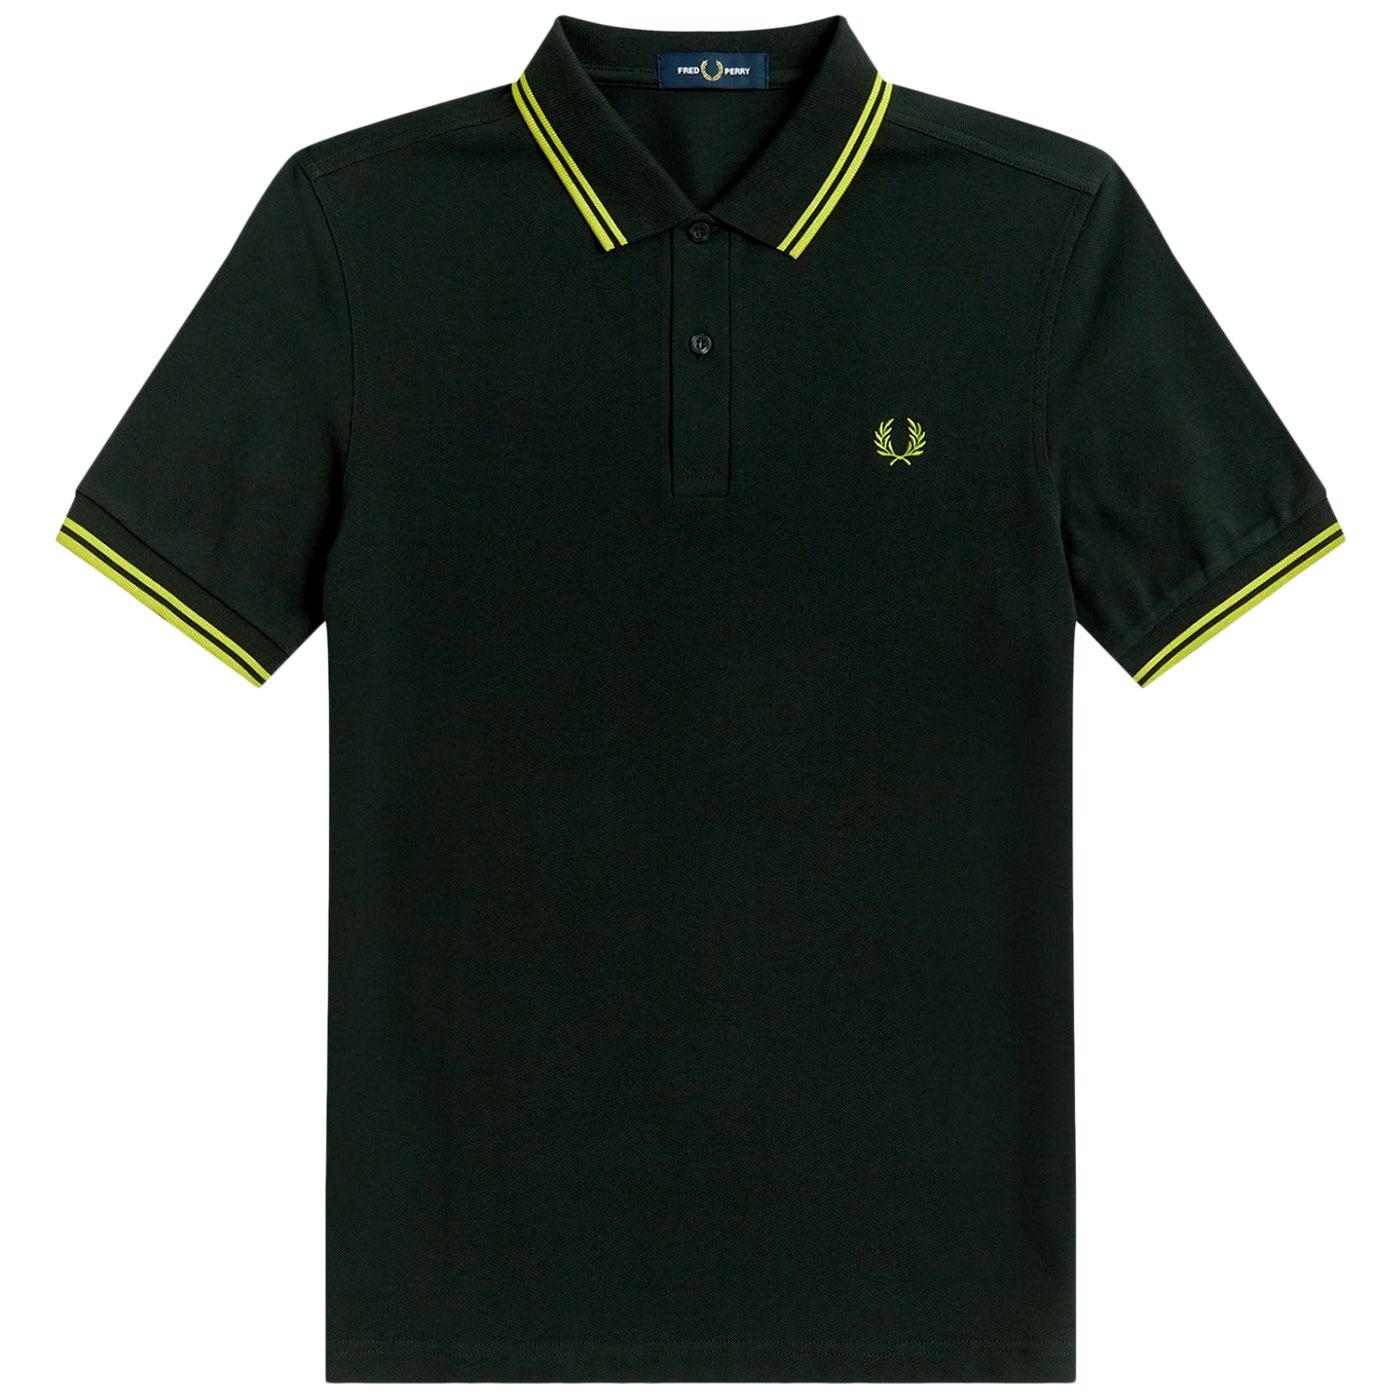 FRED PERRY M3600 Twin Tipped Mod Polo Shirt (BRG)